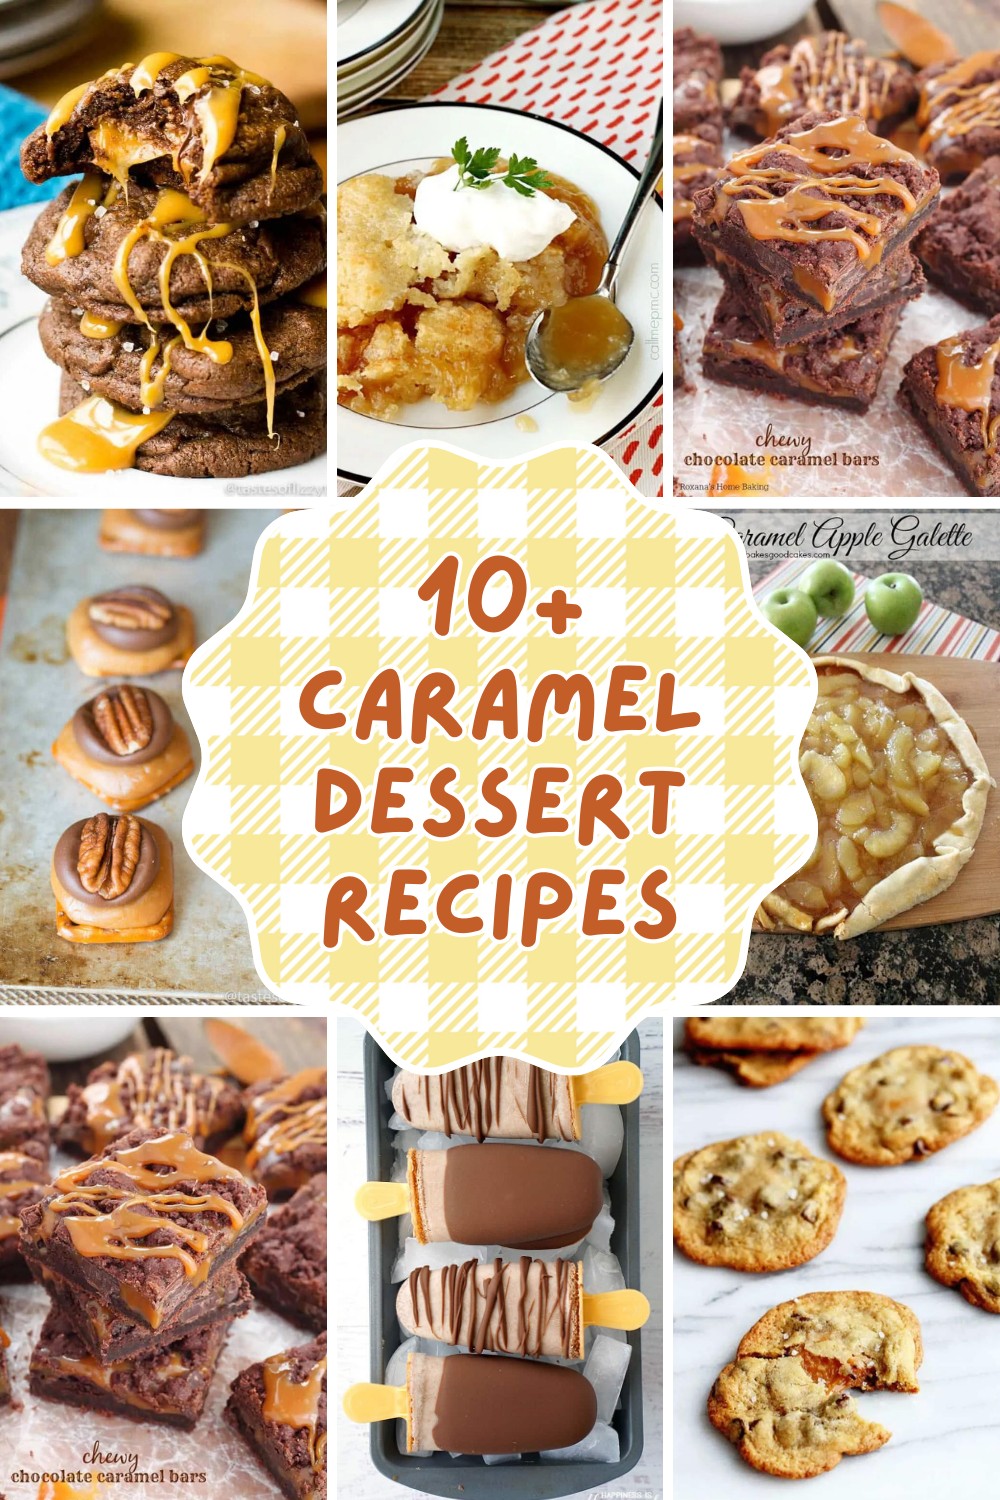 Feeling down? These delicious caramel dessert recipes will turn your day around! From rich caramel cakes to chewy caramel bars, these treats are guaranteed to make you smile. 🍮🍫 #DessertJoy #CaramelCravings